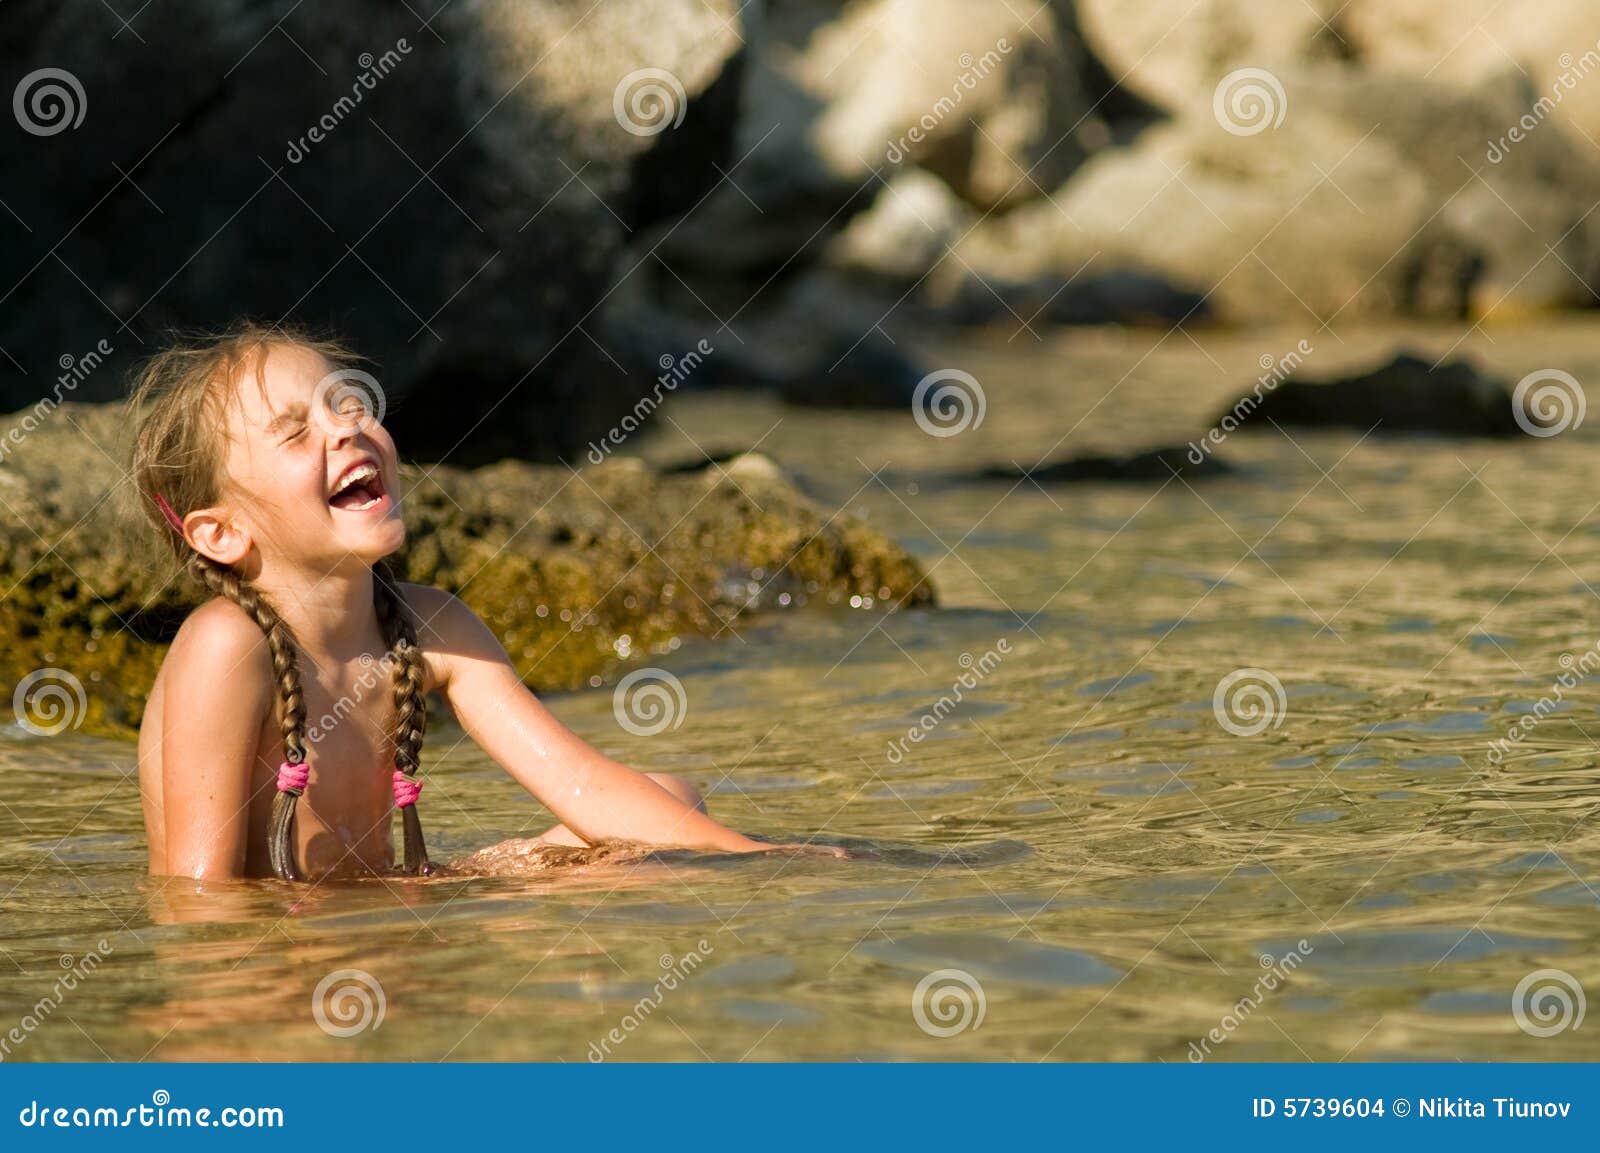 Young Girl in Water Laughing Stock Photo - Image of child, white: 5739604